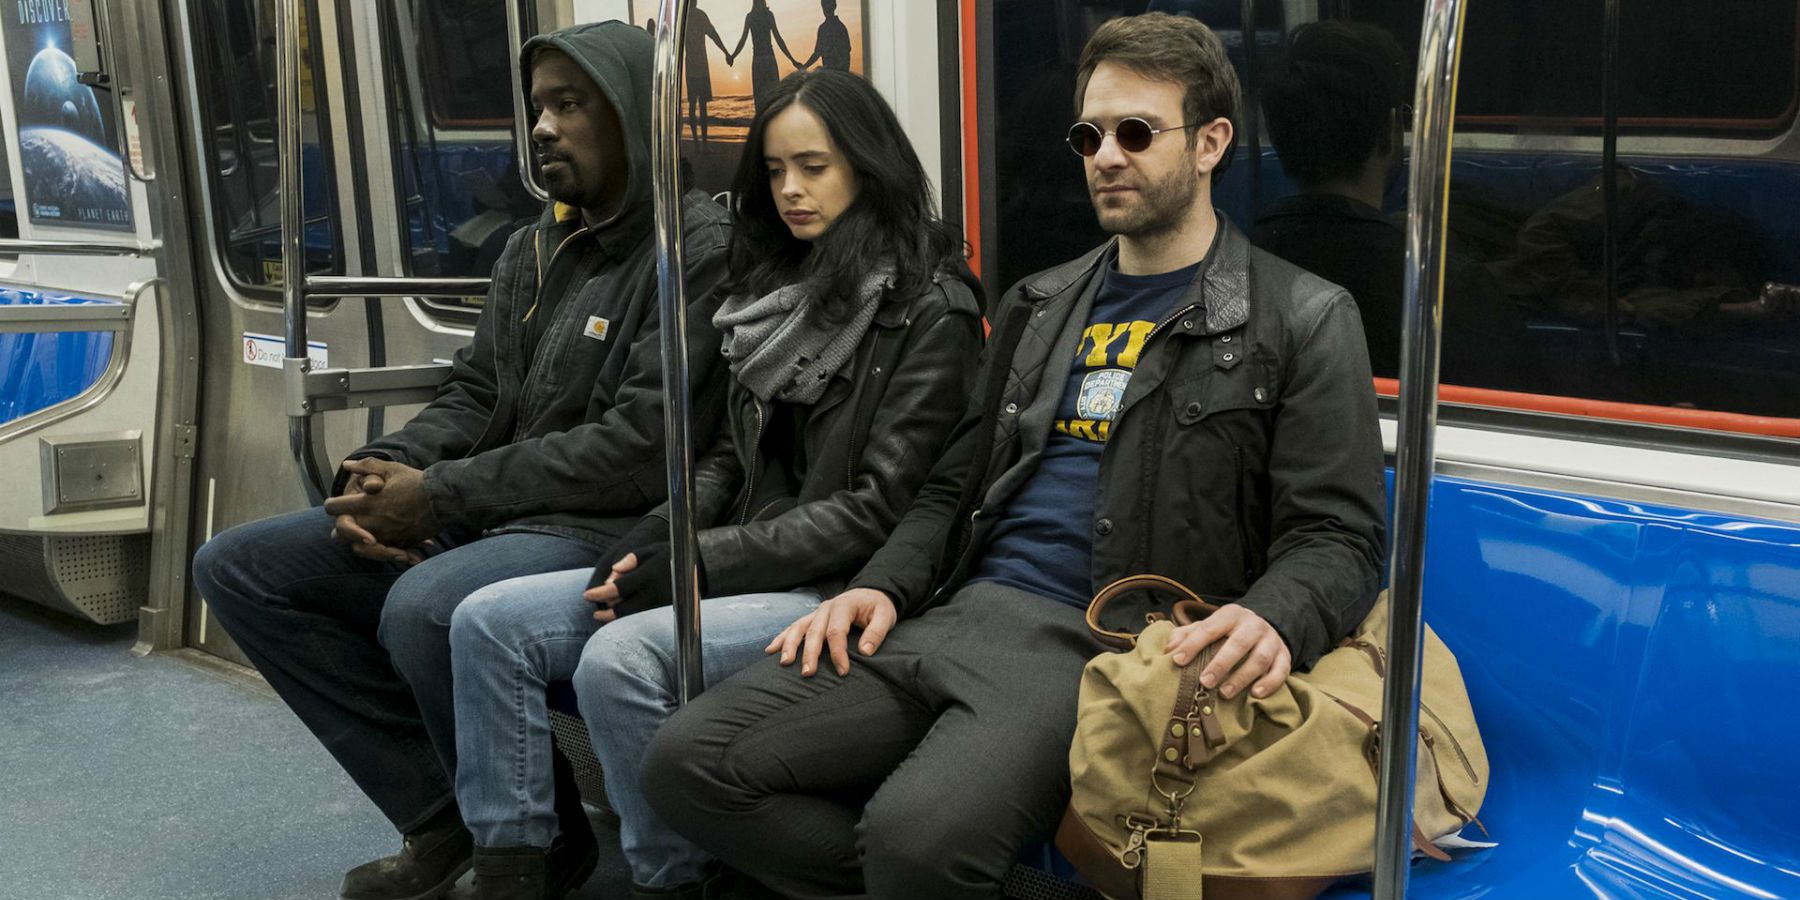 Defenders on the subway